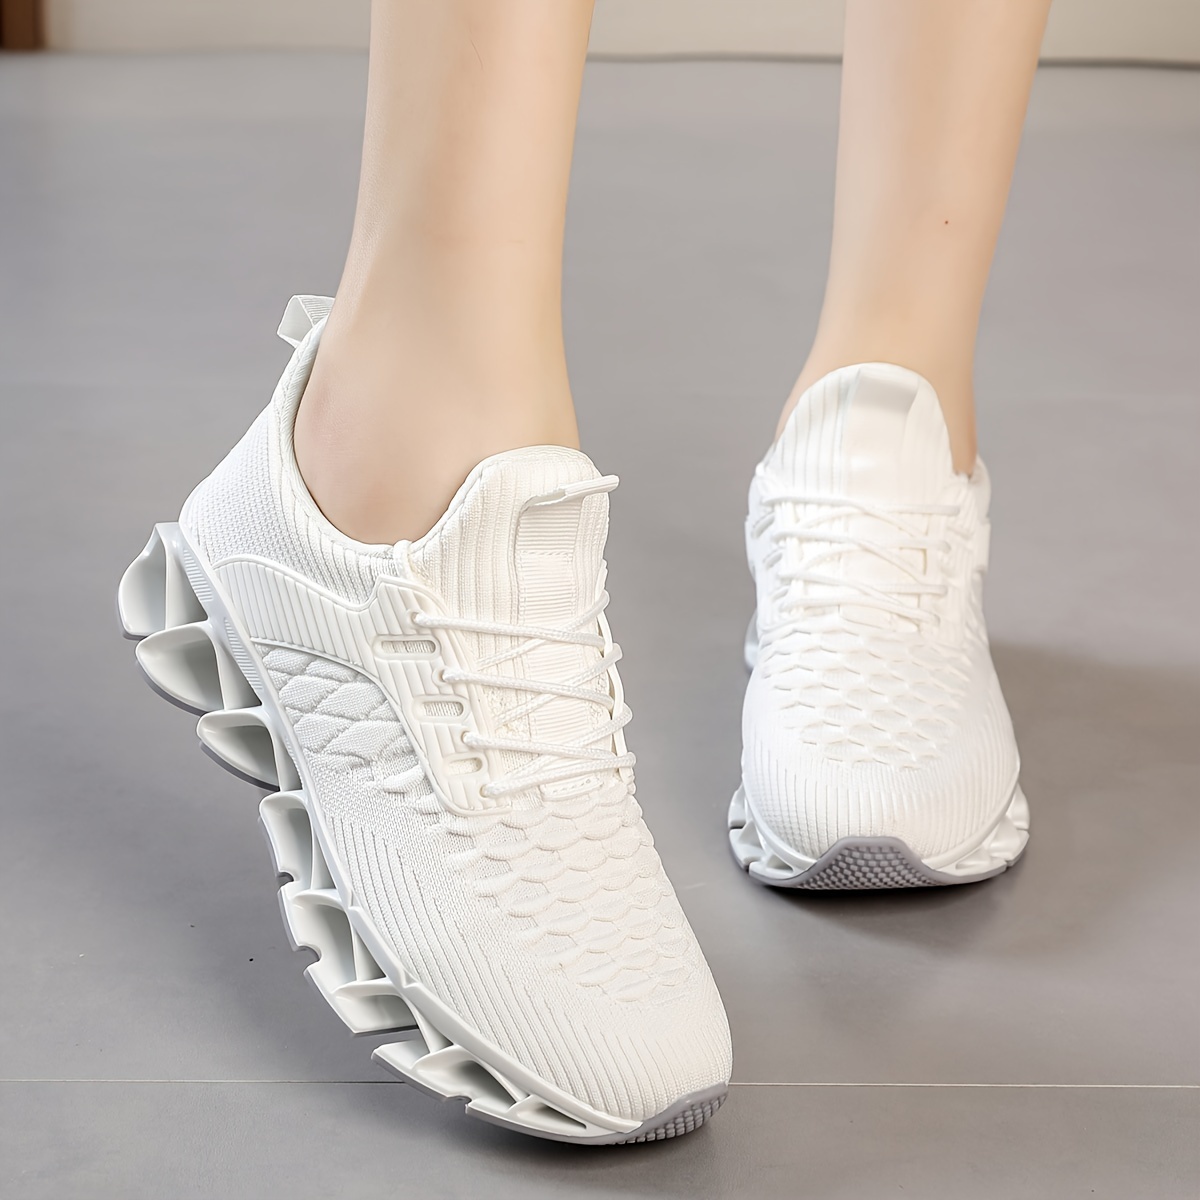 

Women's Slip-on Walking Running Shoes, Casual Fashion Sneakers, Comfortable Breathable Non-slip Work Sneakers, Sports Training Shoes